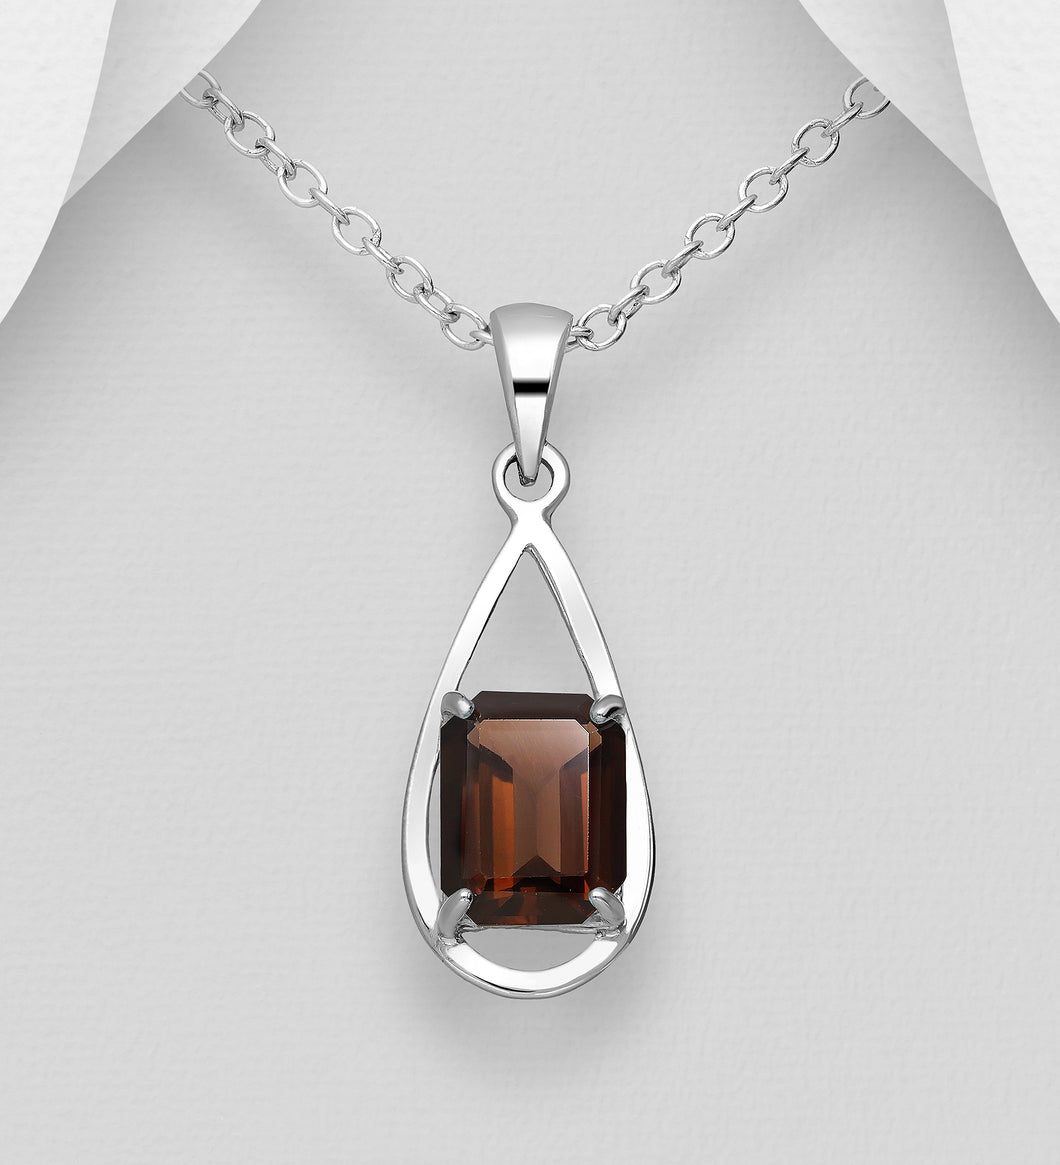 Sterling Silver Droplet Solitaire Pendant, Decorated with Smoky Quartz Gemstone